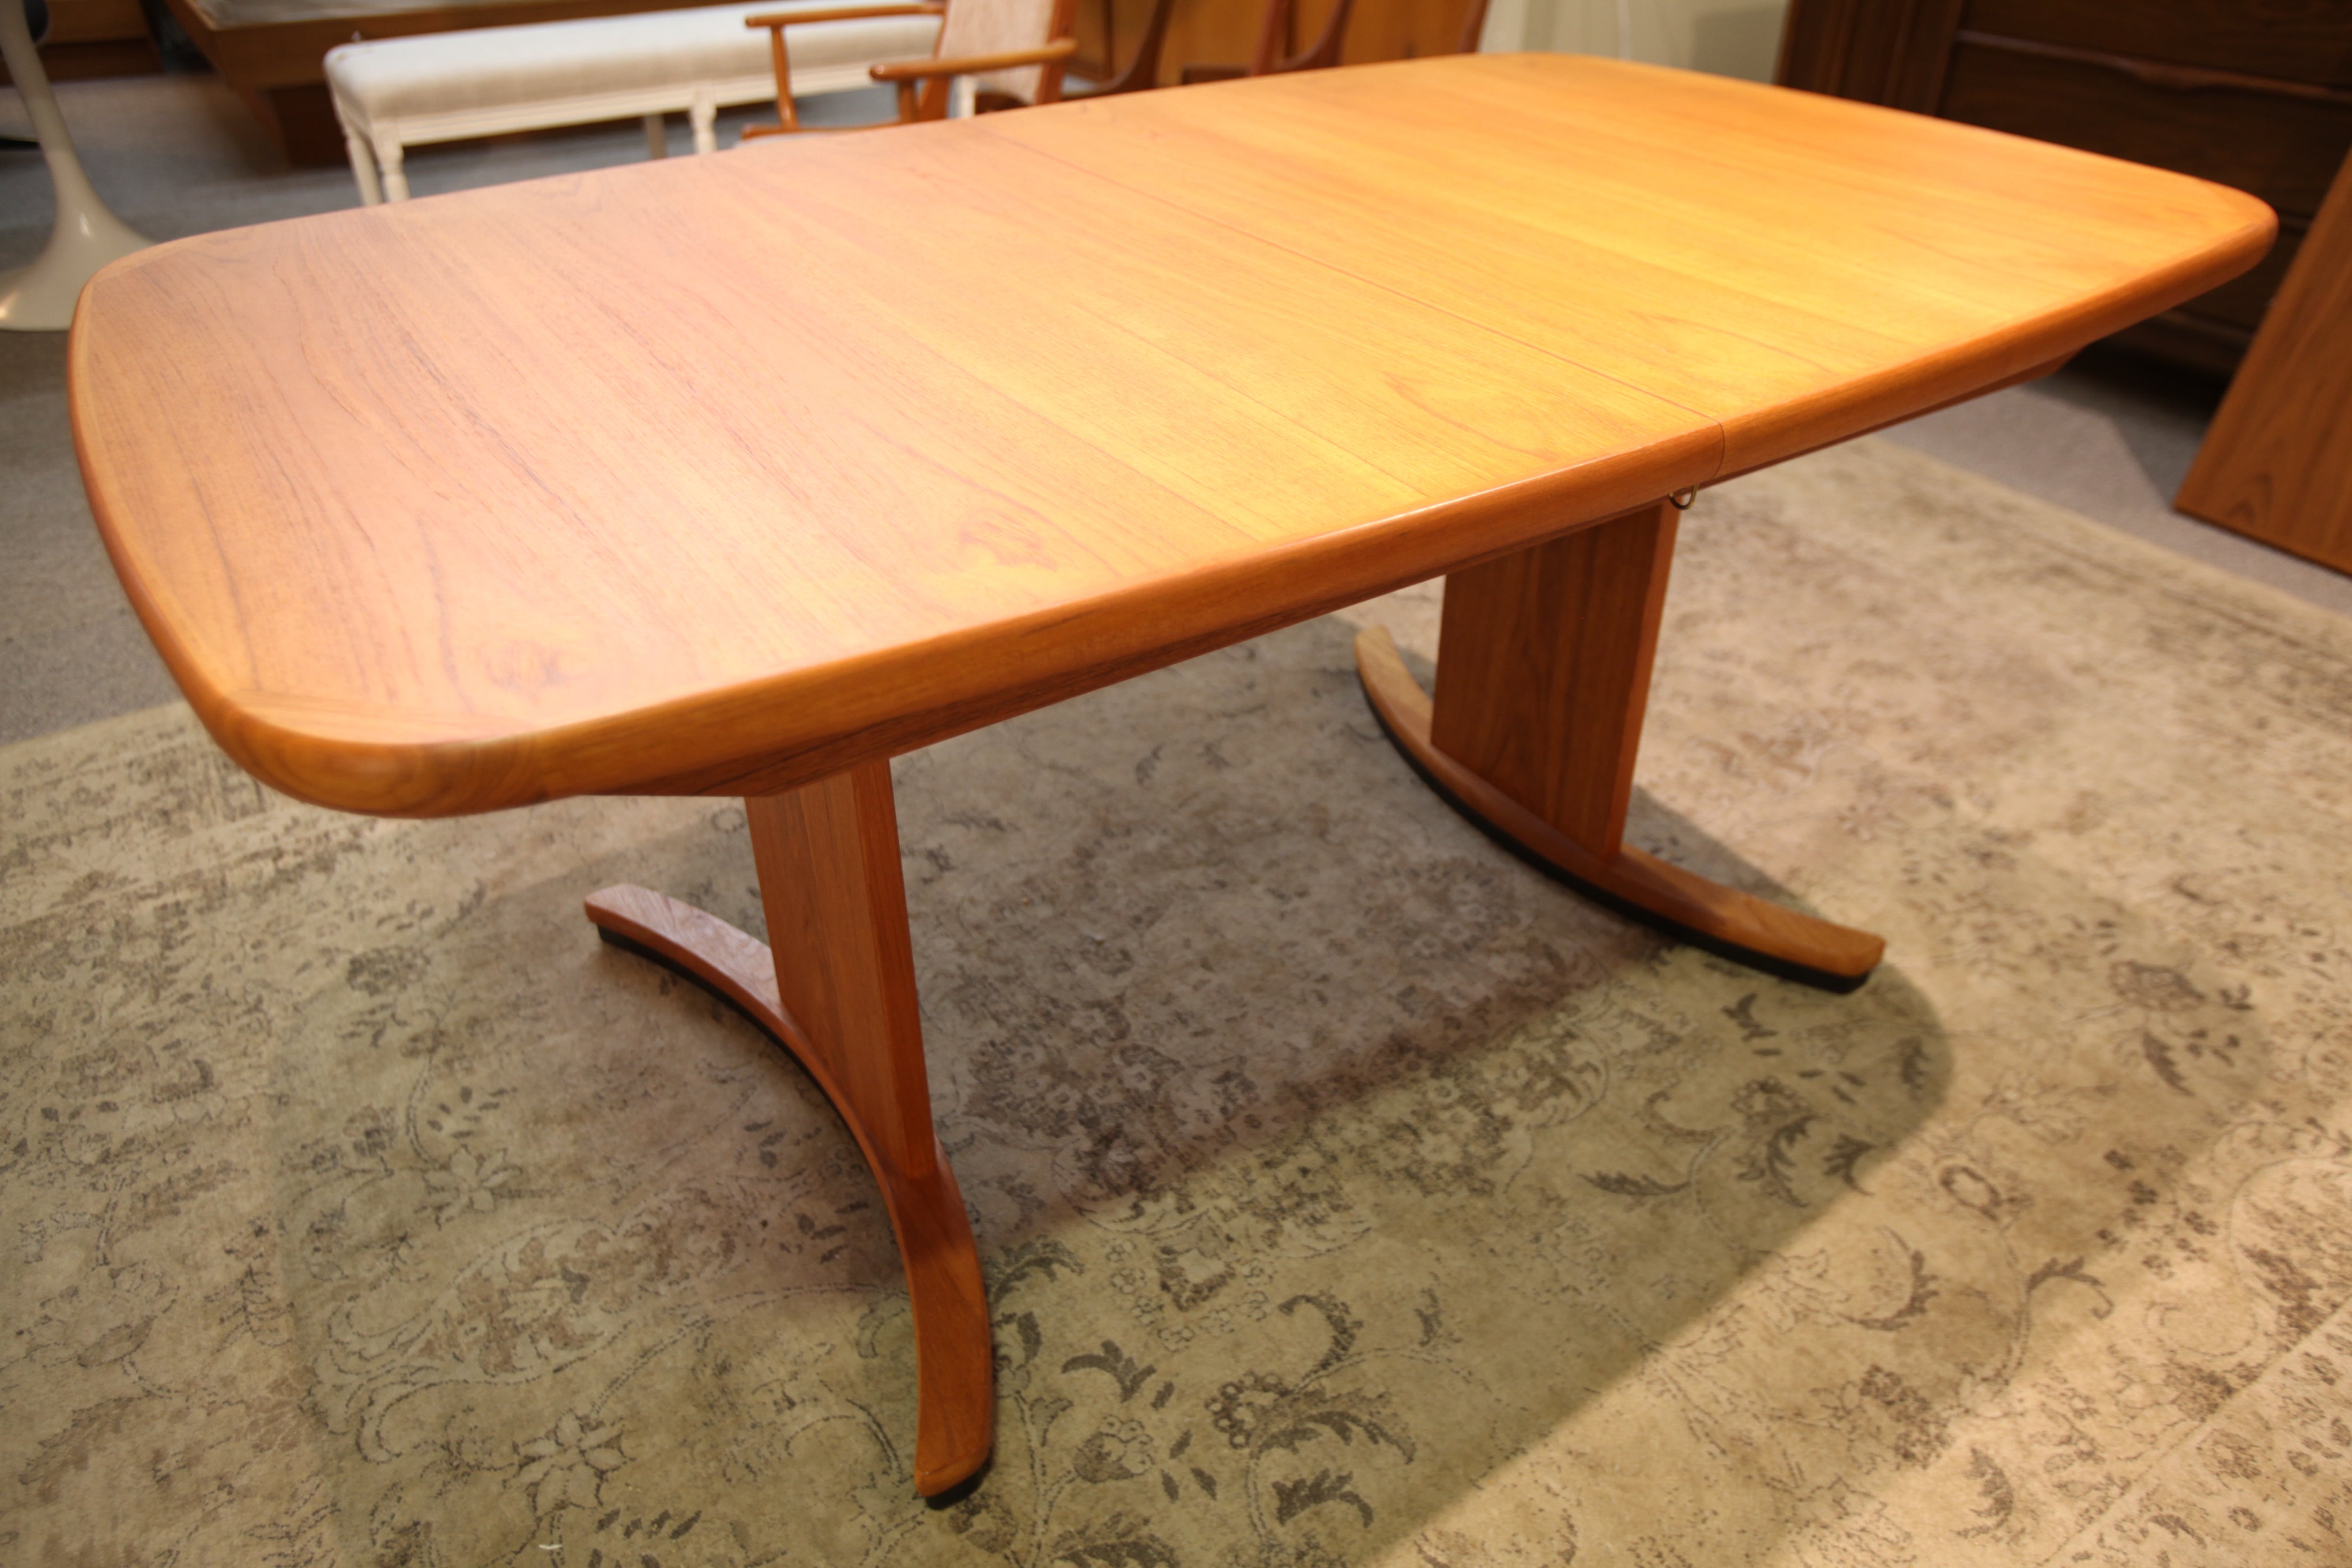 Fabulous Long Teak Table w/ 2 Leafs and Mechanical Drive (101" x 38") or (61.5" x 38")